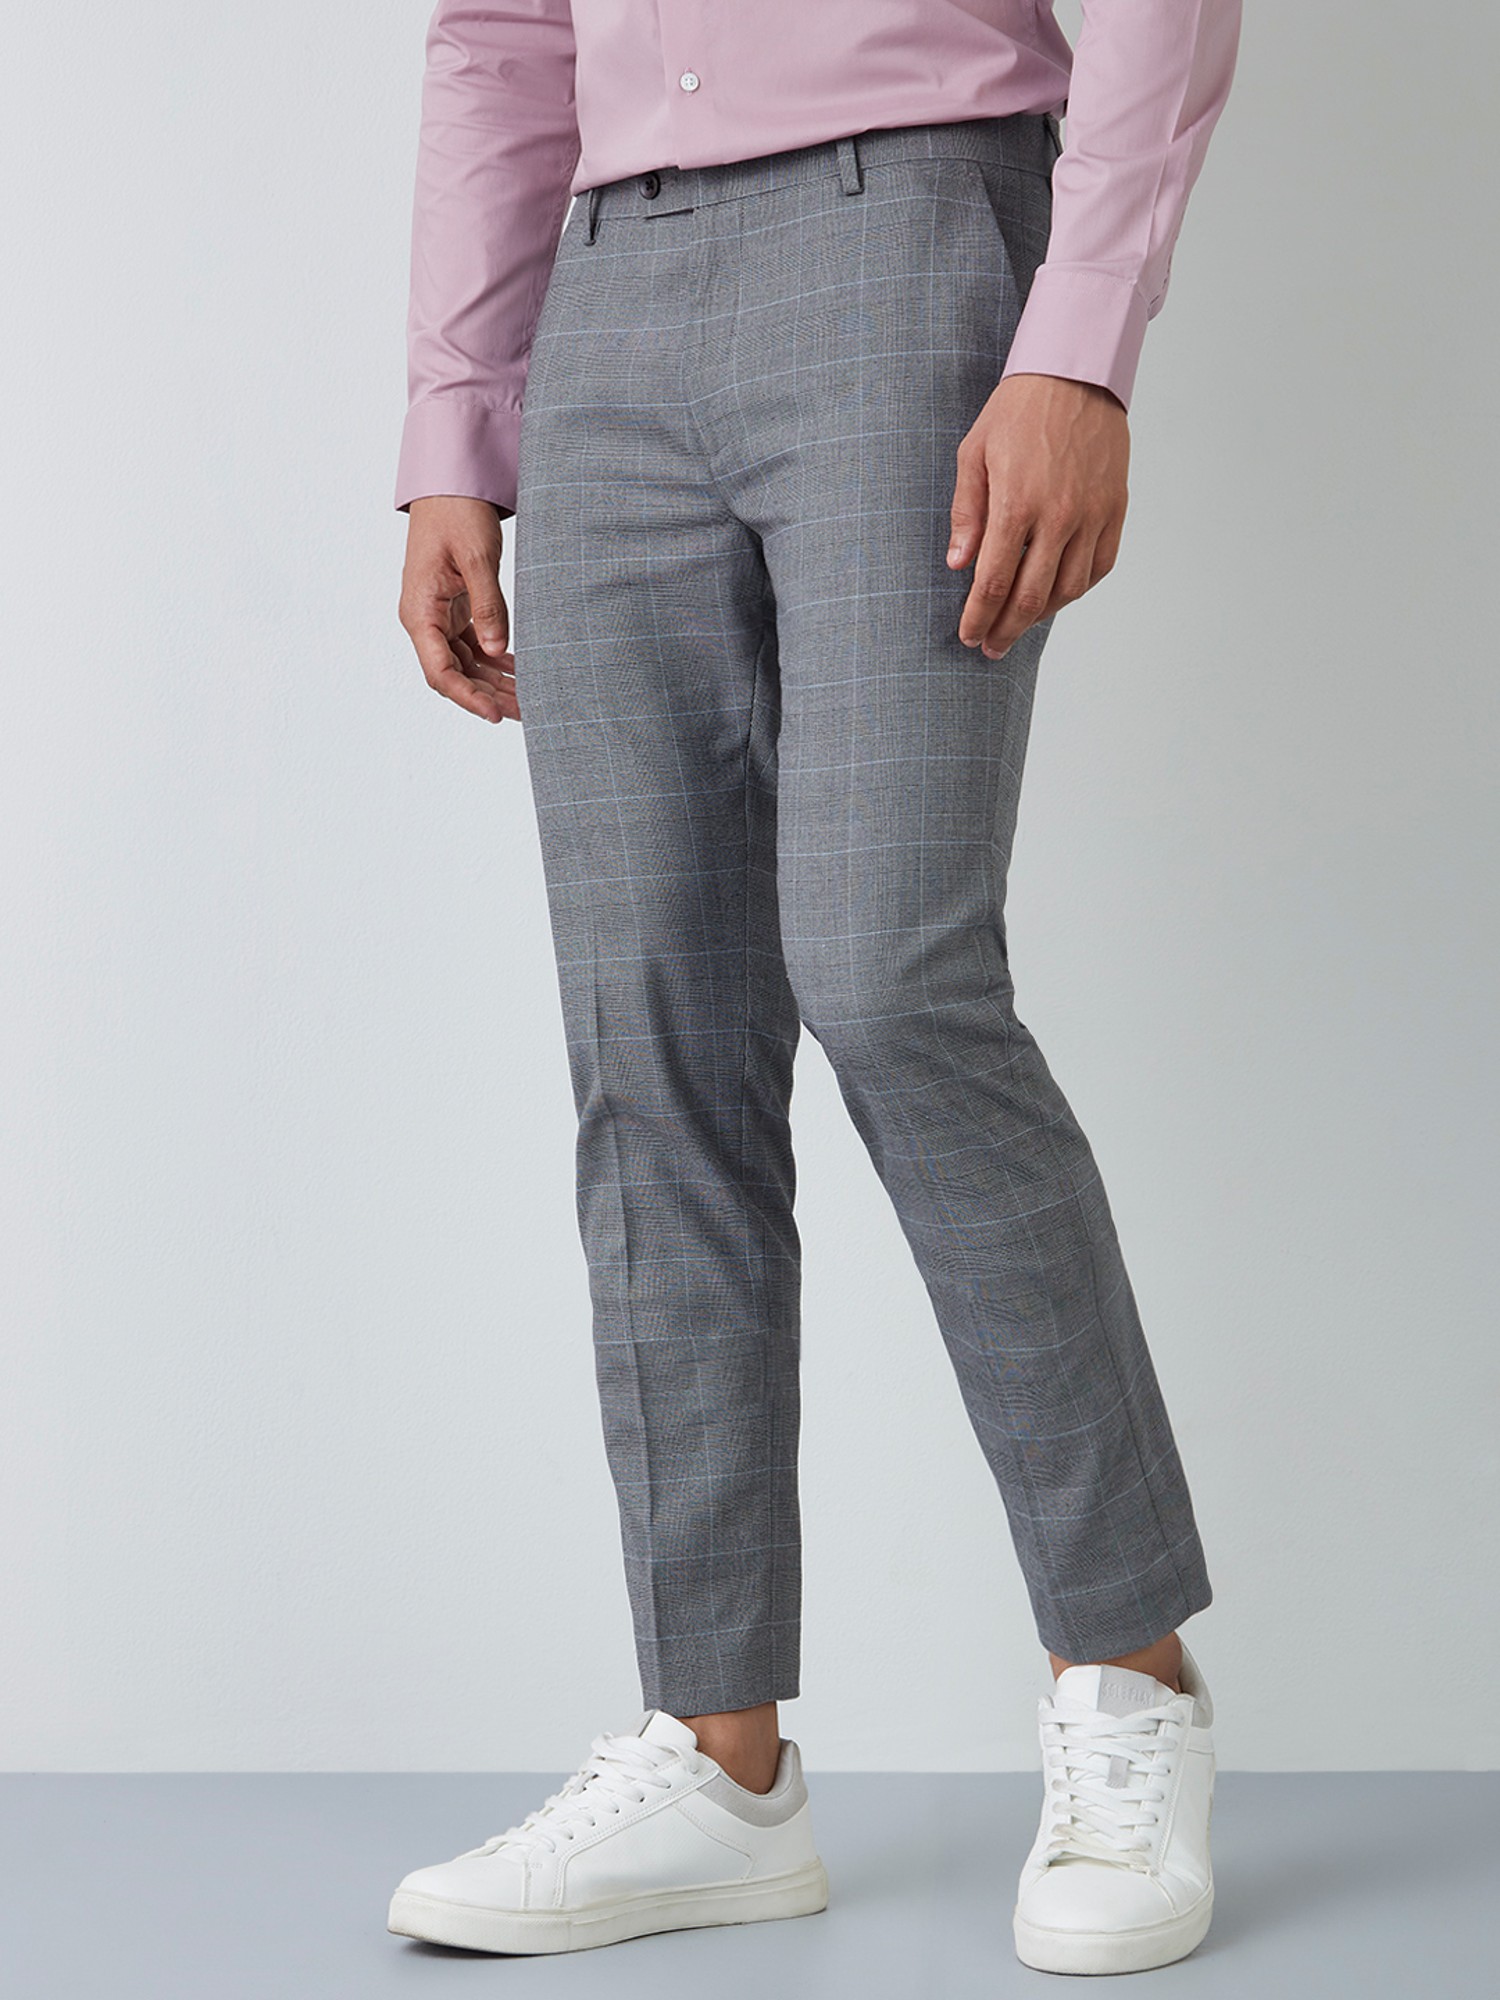 Super Skinny Suit Trousers Shop - tundraecology.hi.is 1694454460